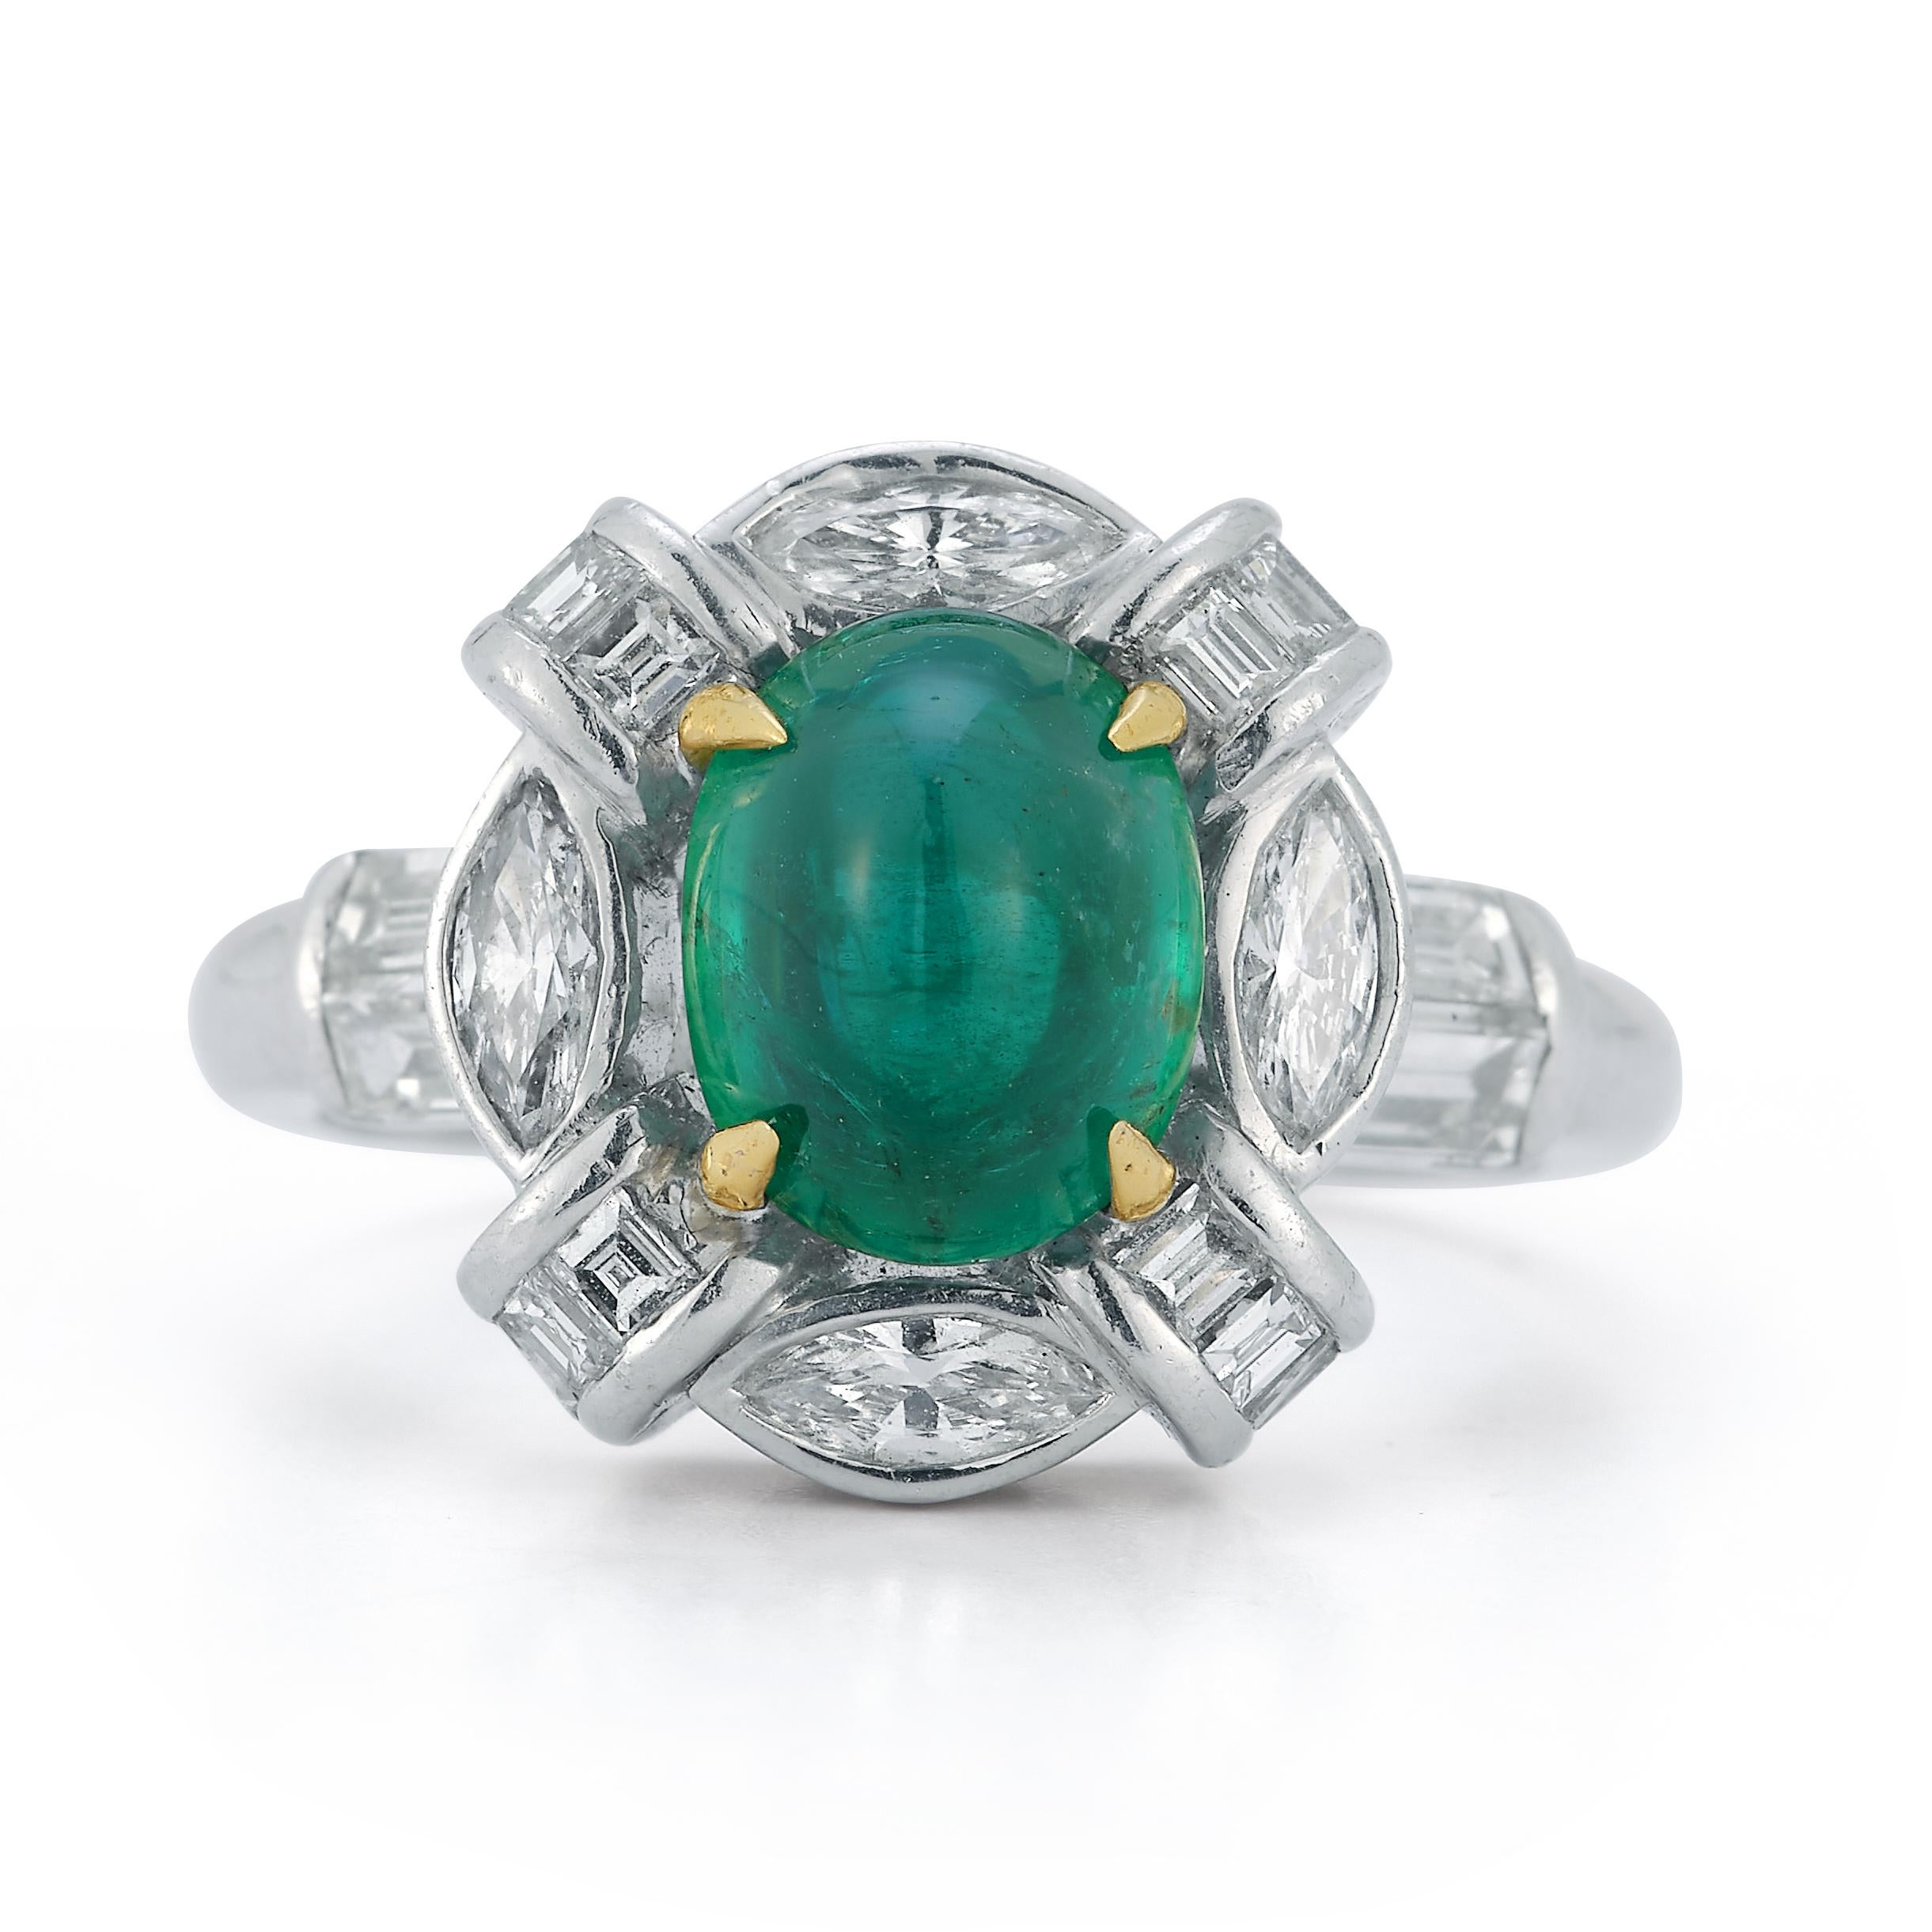 Cabochon Emerald & Diamond Ring

A platinum ring set with a central cabochon emerald encircled by marquise & baguette diamonds

Emerald approximate weight: 2.82ct

Diamonds total approximate weight: 1.44ct

Ring Size: 6.75
Resizable free of charge